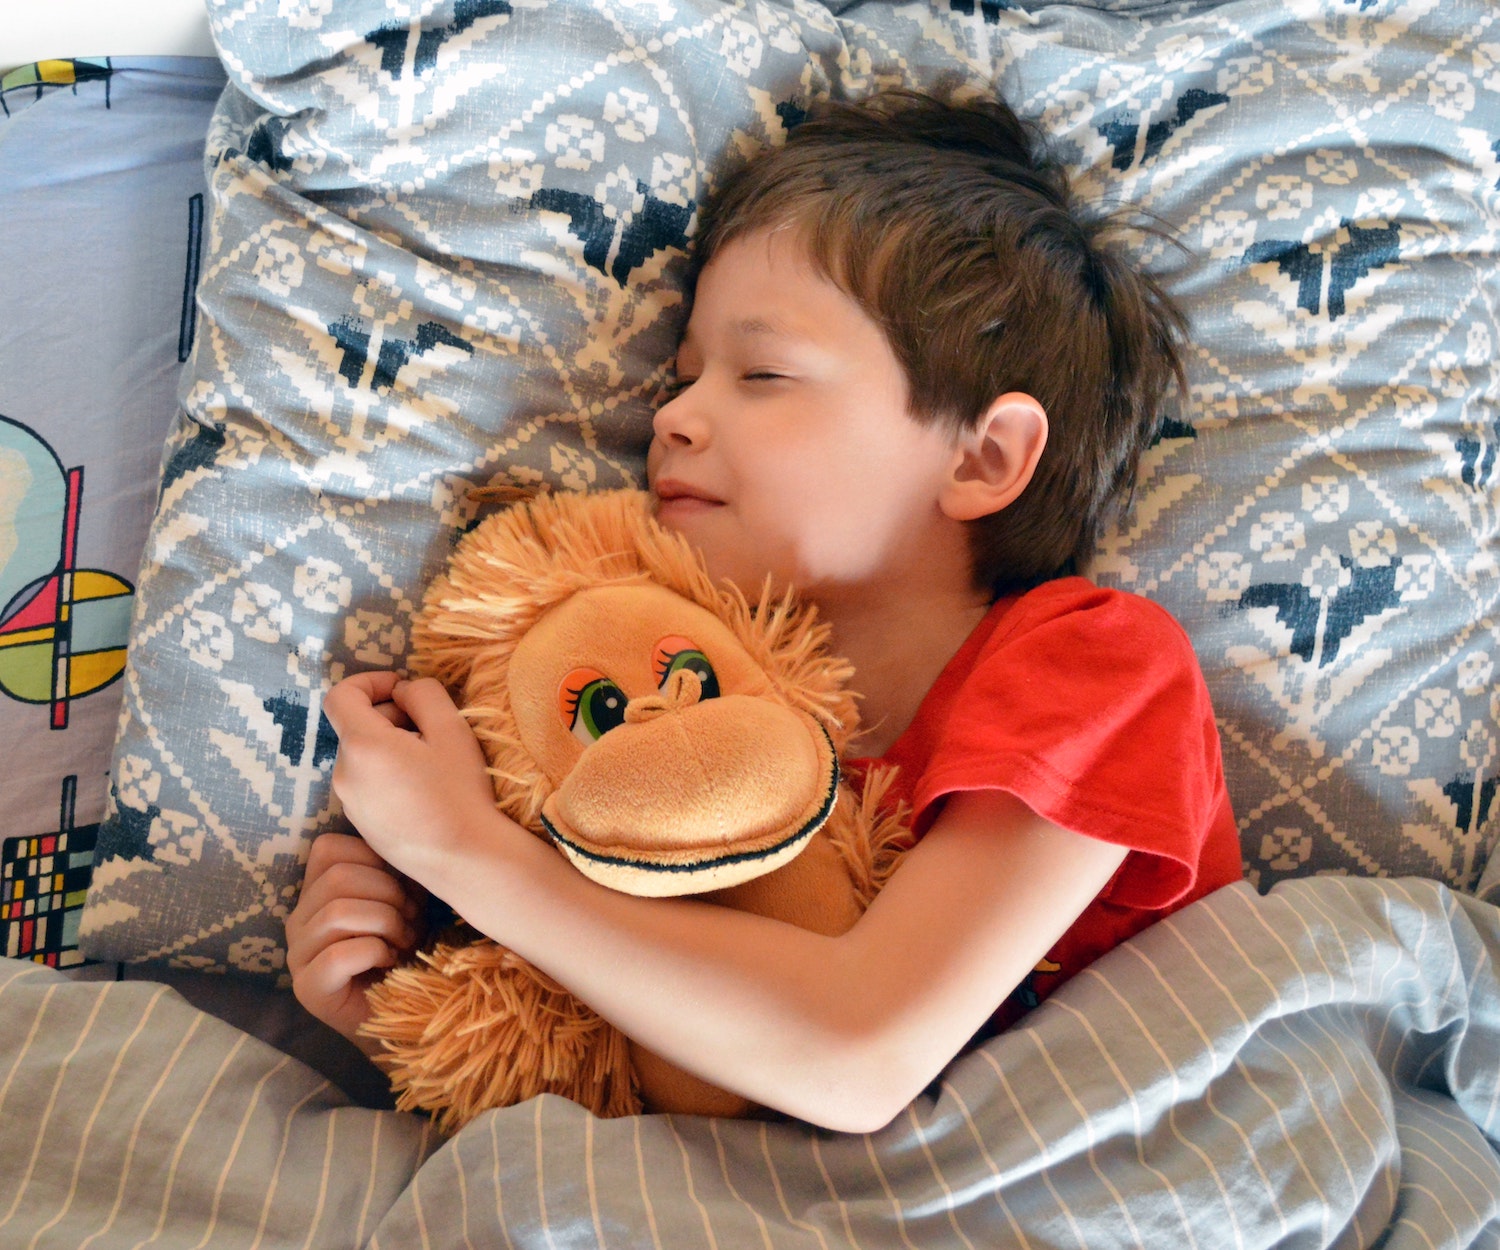 FAQs for hosting refugees: child sleeping in a bed hugging a stuffed animal